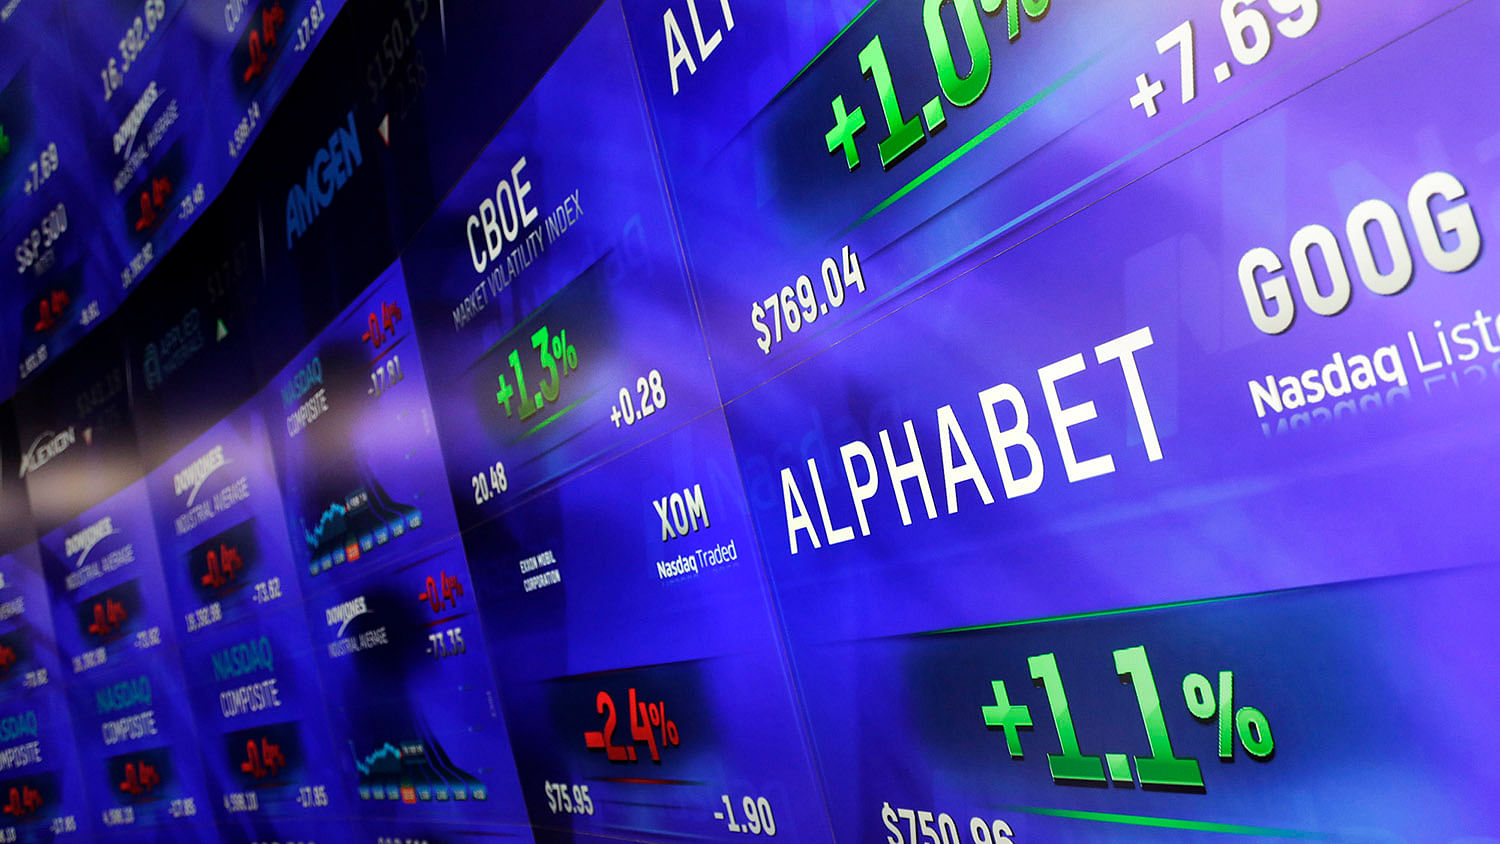 Alphabet Inc is now richer and more valued than Apple Inc.&nbsp;